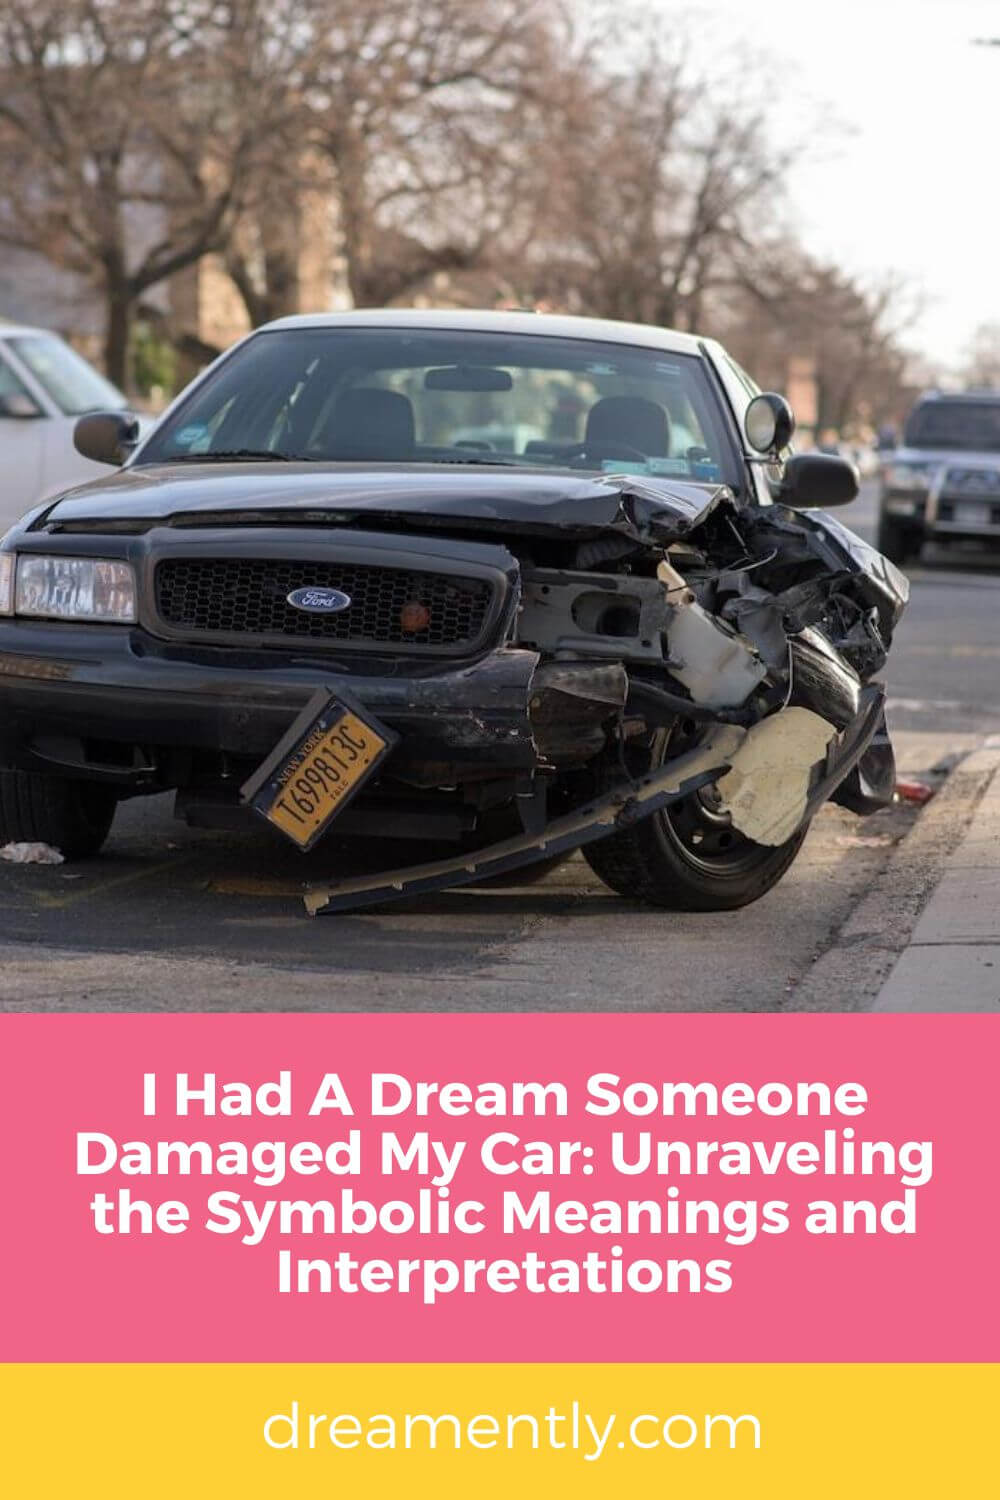 I Had A Dream Someone Damaged My Car- Unraveling the Symbolic Meanings and Interpretations (2)